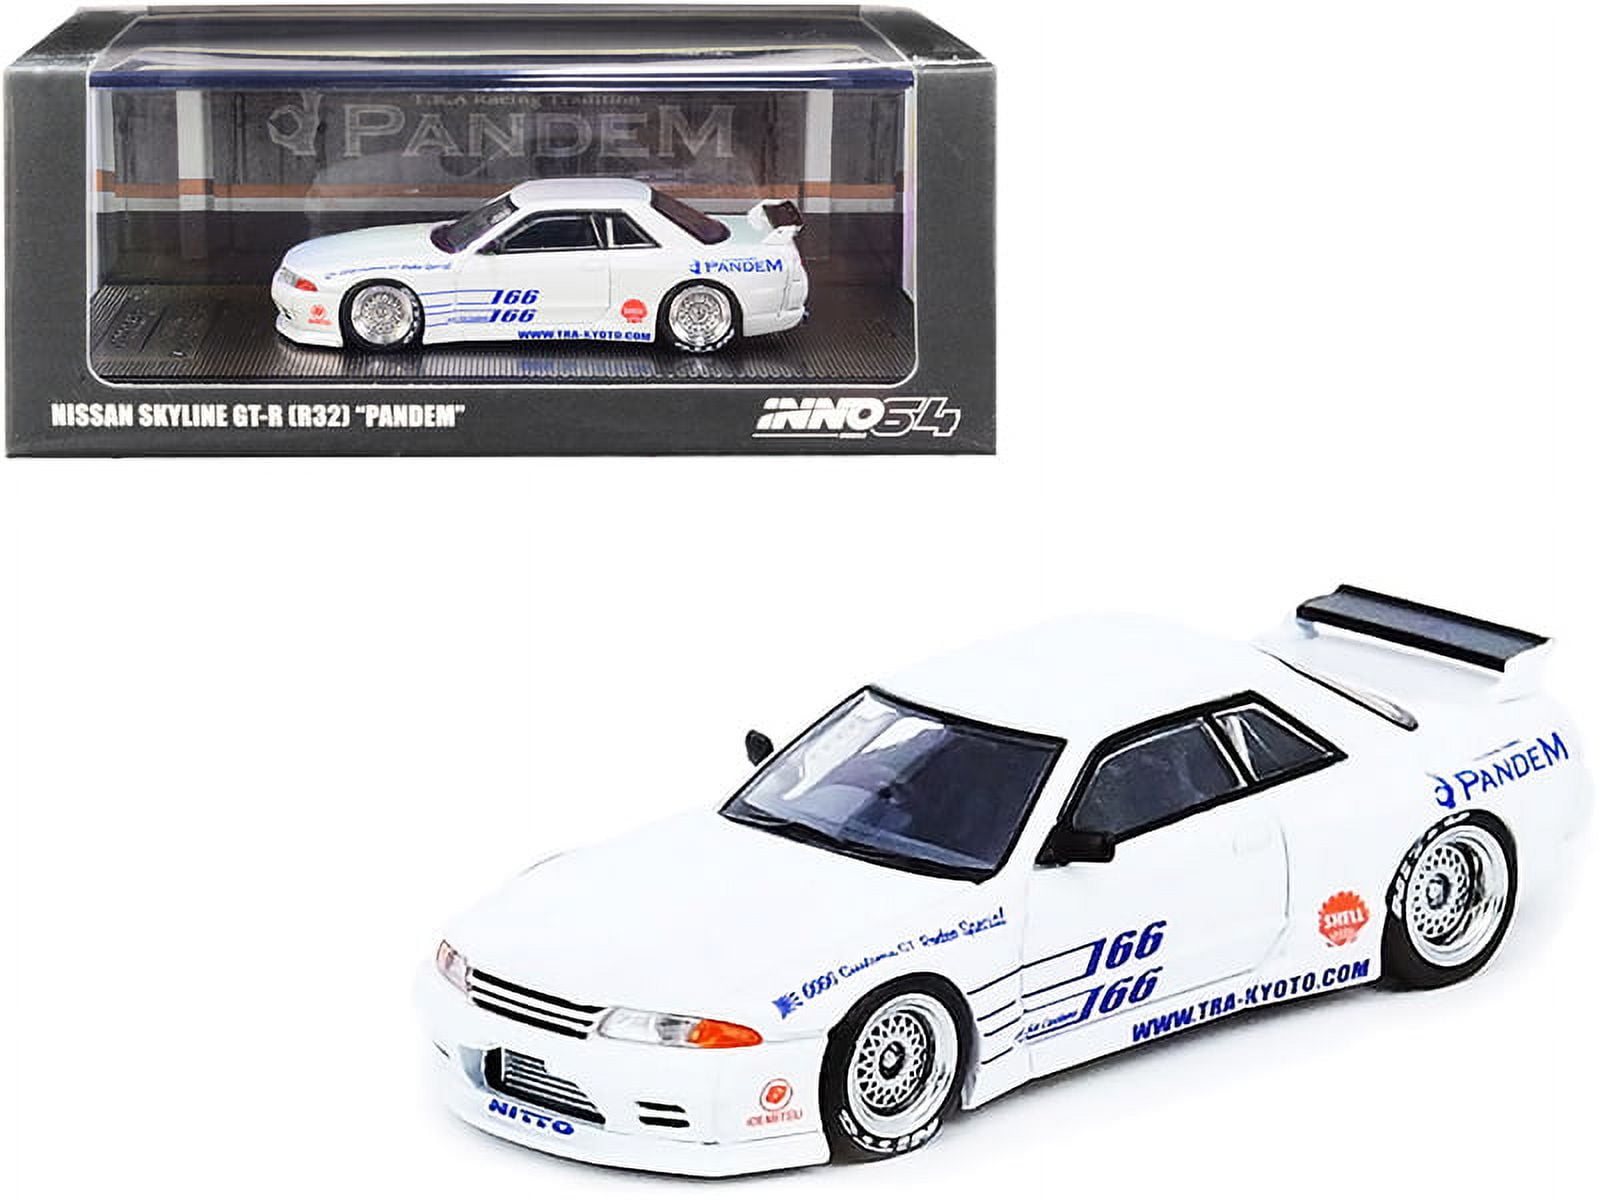 Nissan Skyline GT-R (R32) Pandem Rocket Bunny RHD (Right Hand Drive) White  with Graphics 1/64 Diecast Model Car by Inno Models